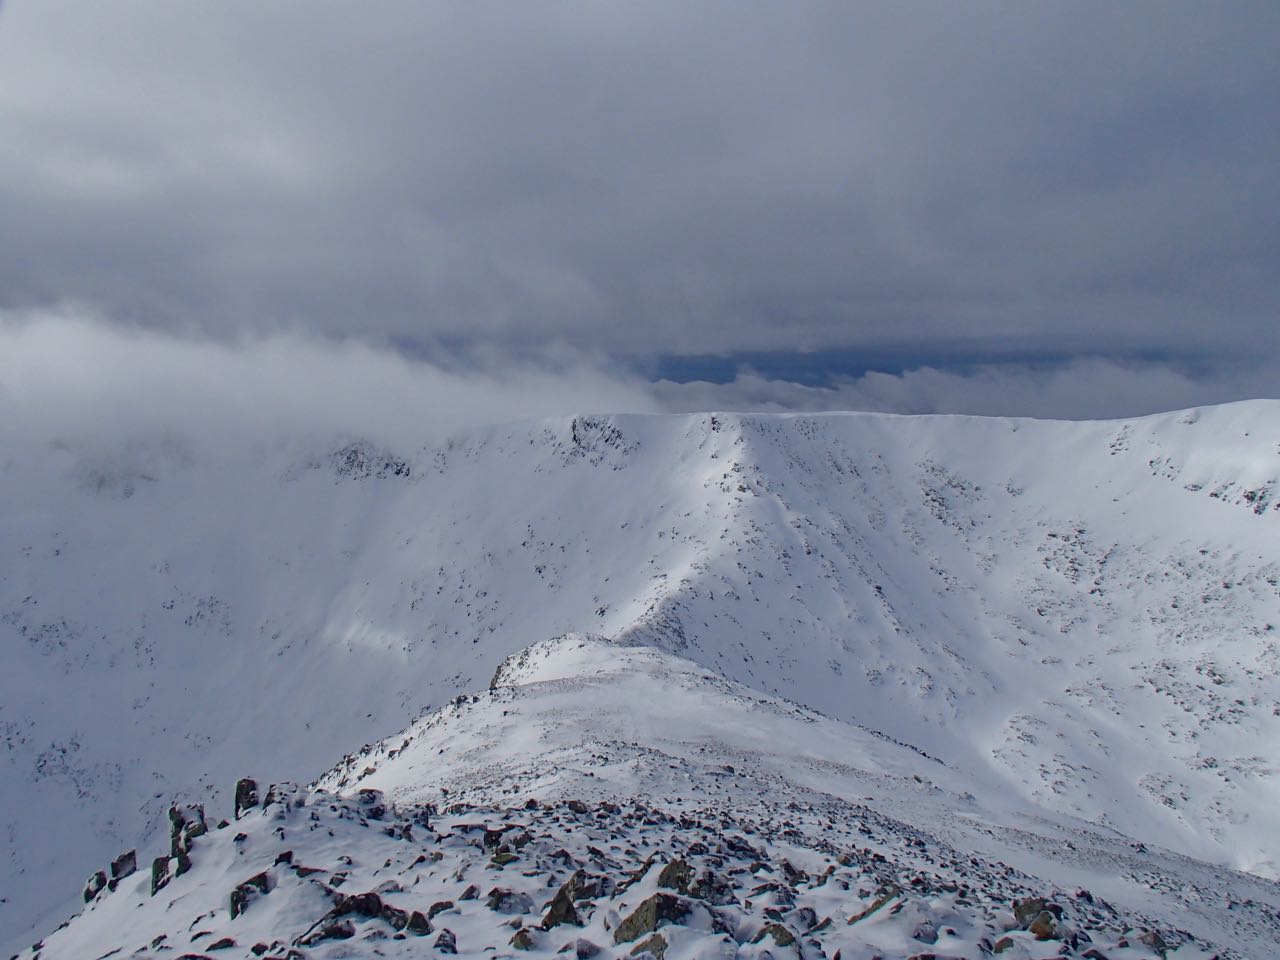 Looking down the West ridge of Meall a Bhuiridh